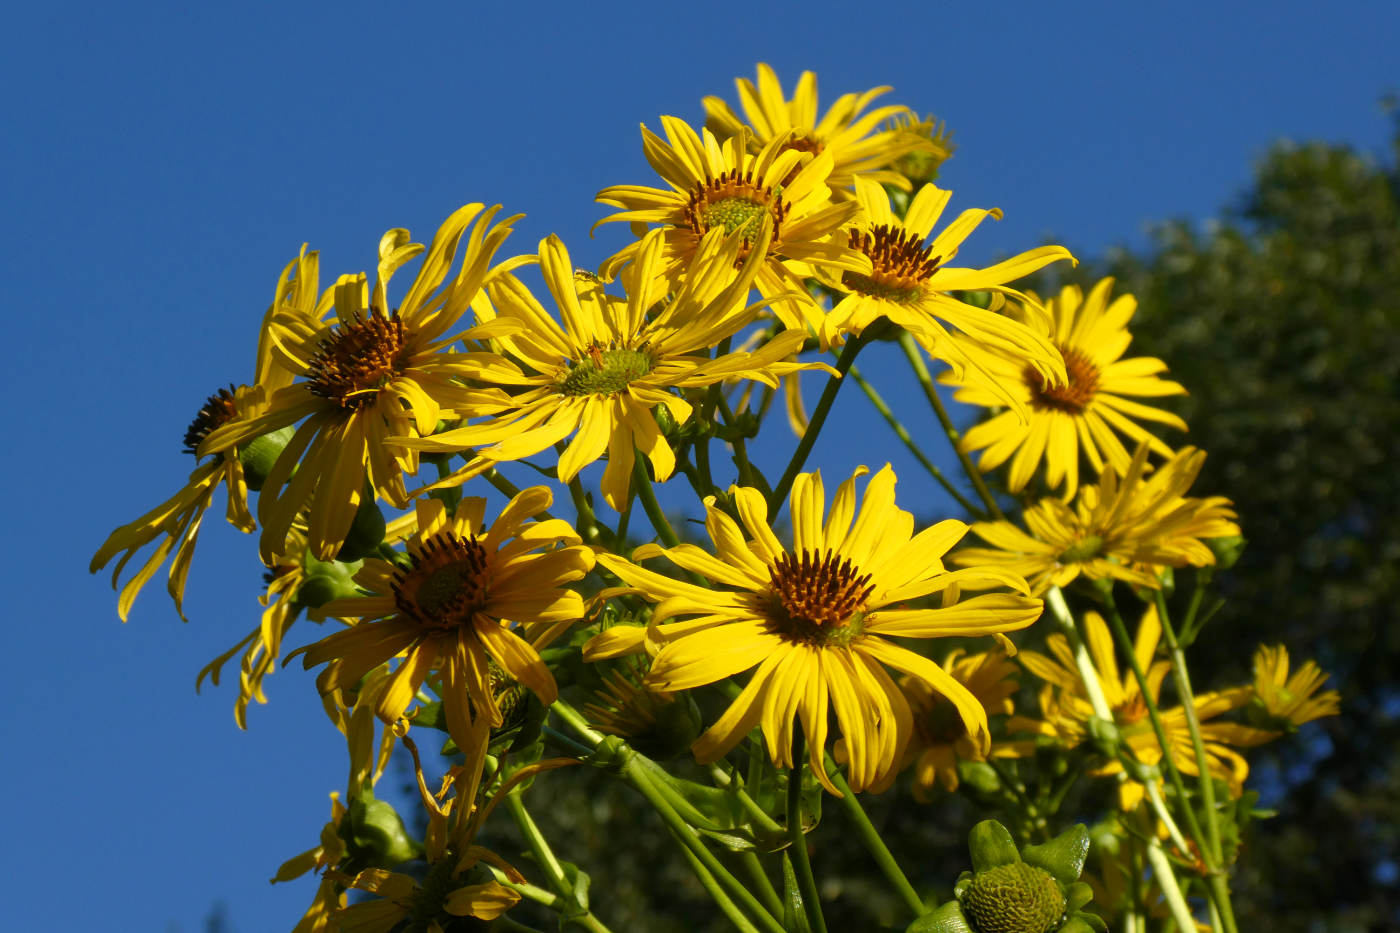 looking up at yellow sunflowers against a deep blue sky